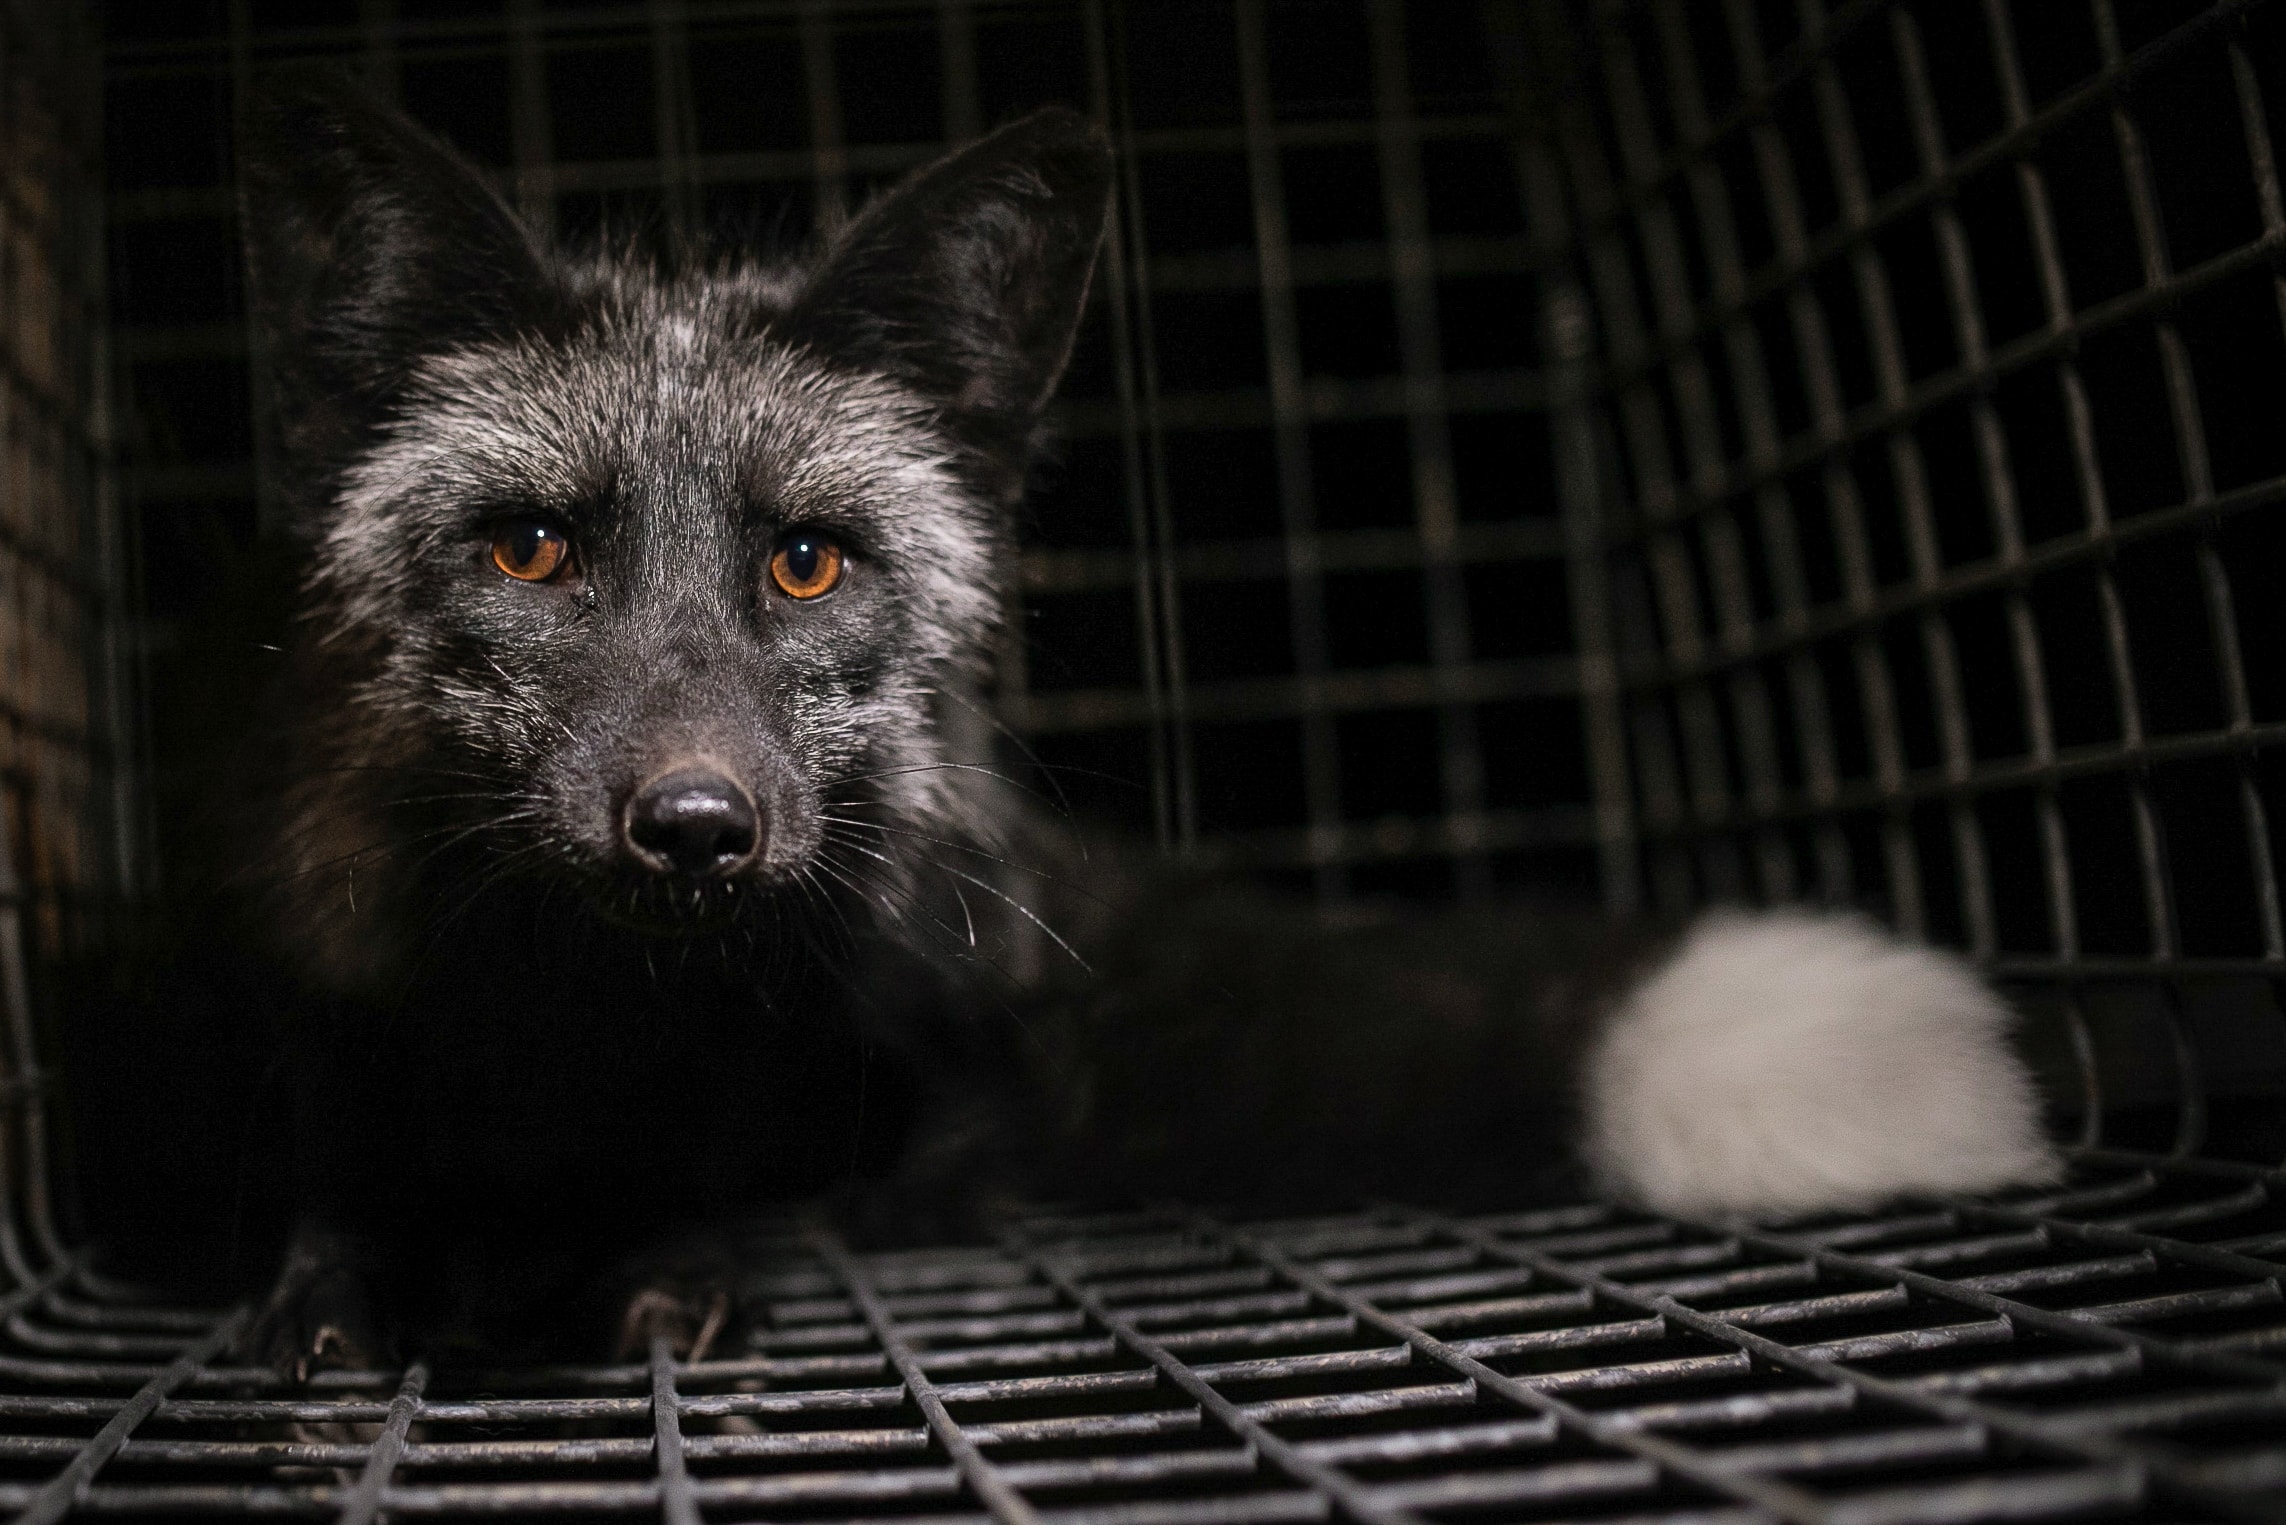 A Silver Fox Looks Out From A Small Cage At A Fur Farm. Poland, 2017. Andrew Skowron / We Animals Media